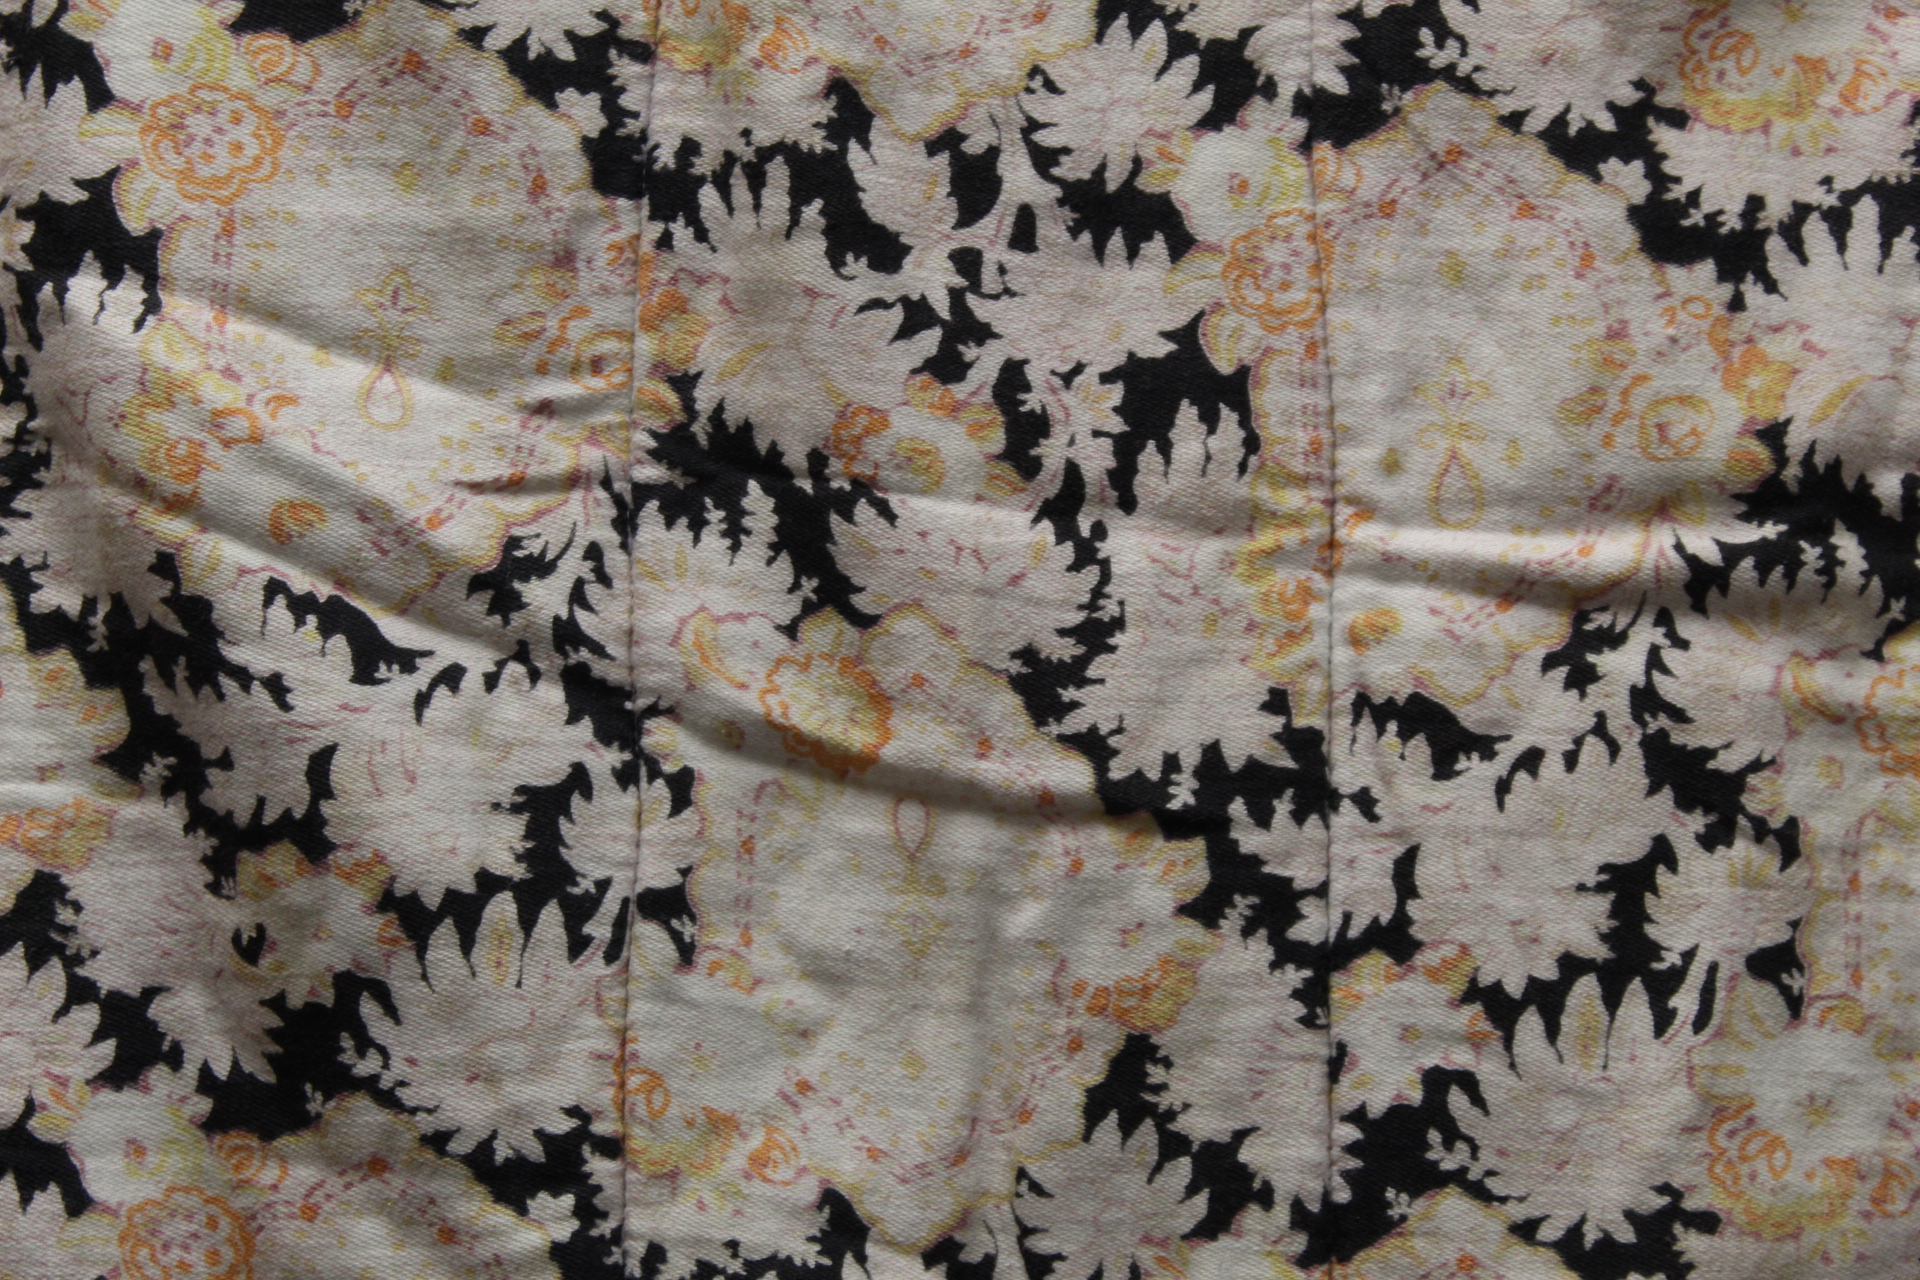 Early 20th century quilted bedspread with pale floral decoration on black ground, sky - Image 3 of 5